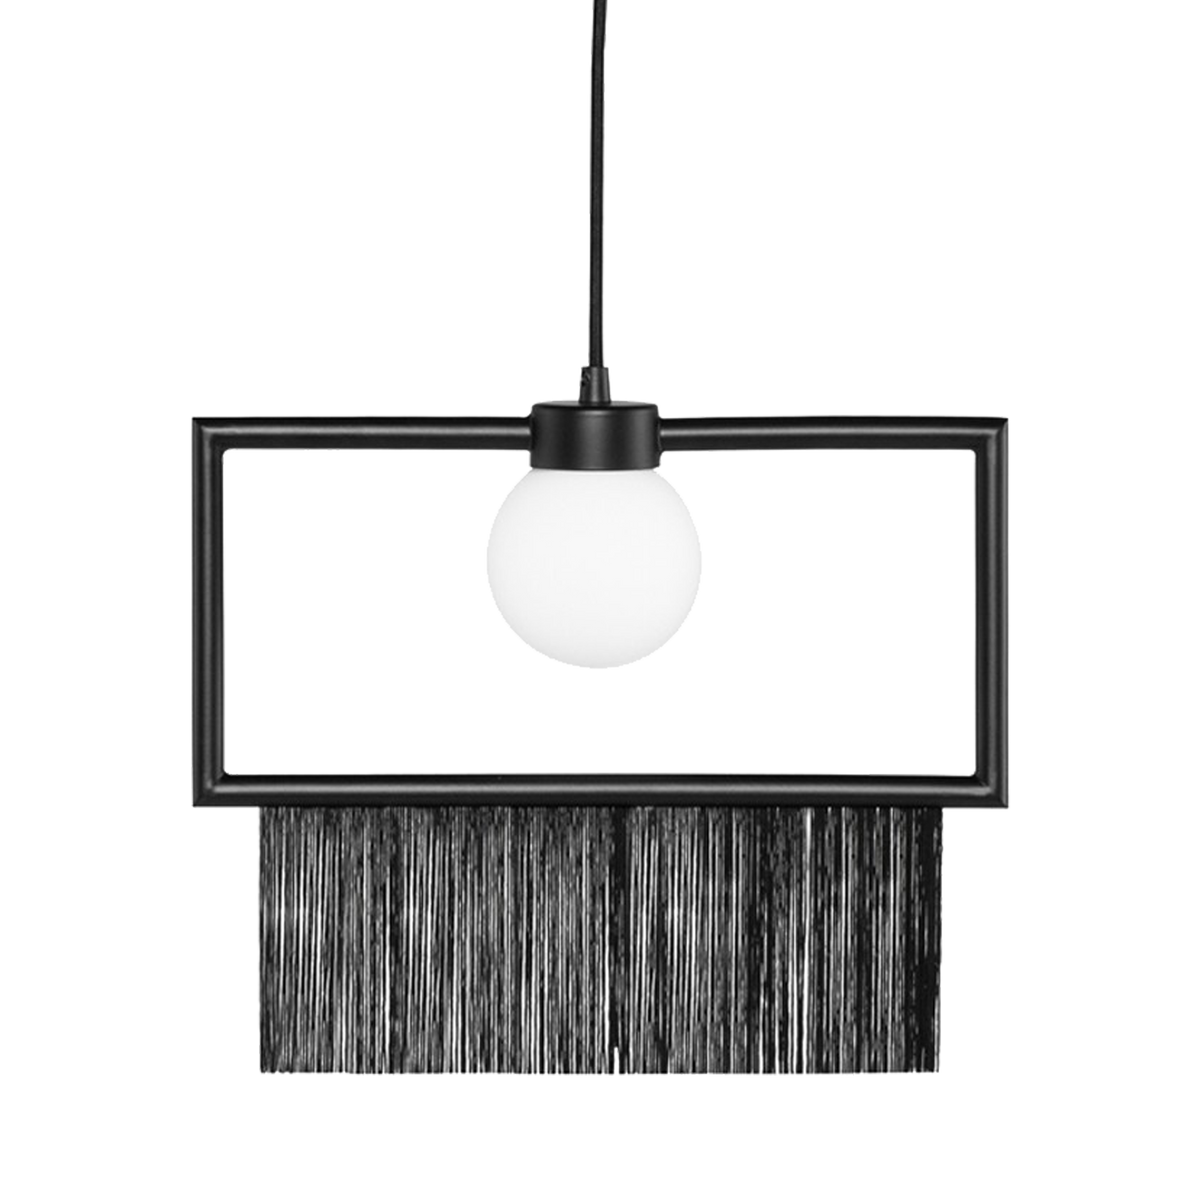 With a graphic character, the Belize pendant is a playful and spirited alternative to your average light fixture.